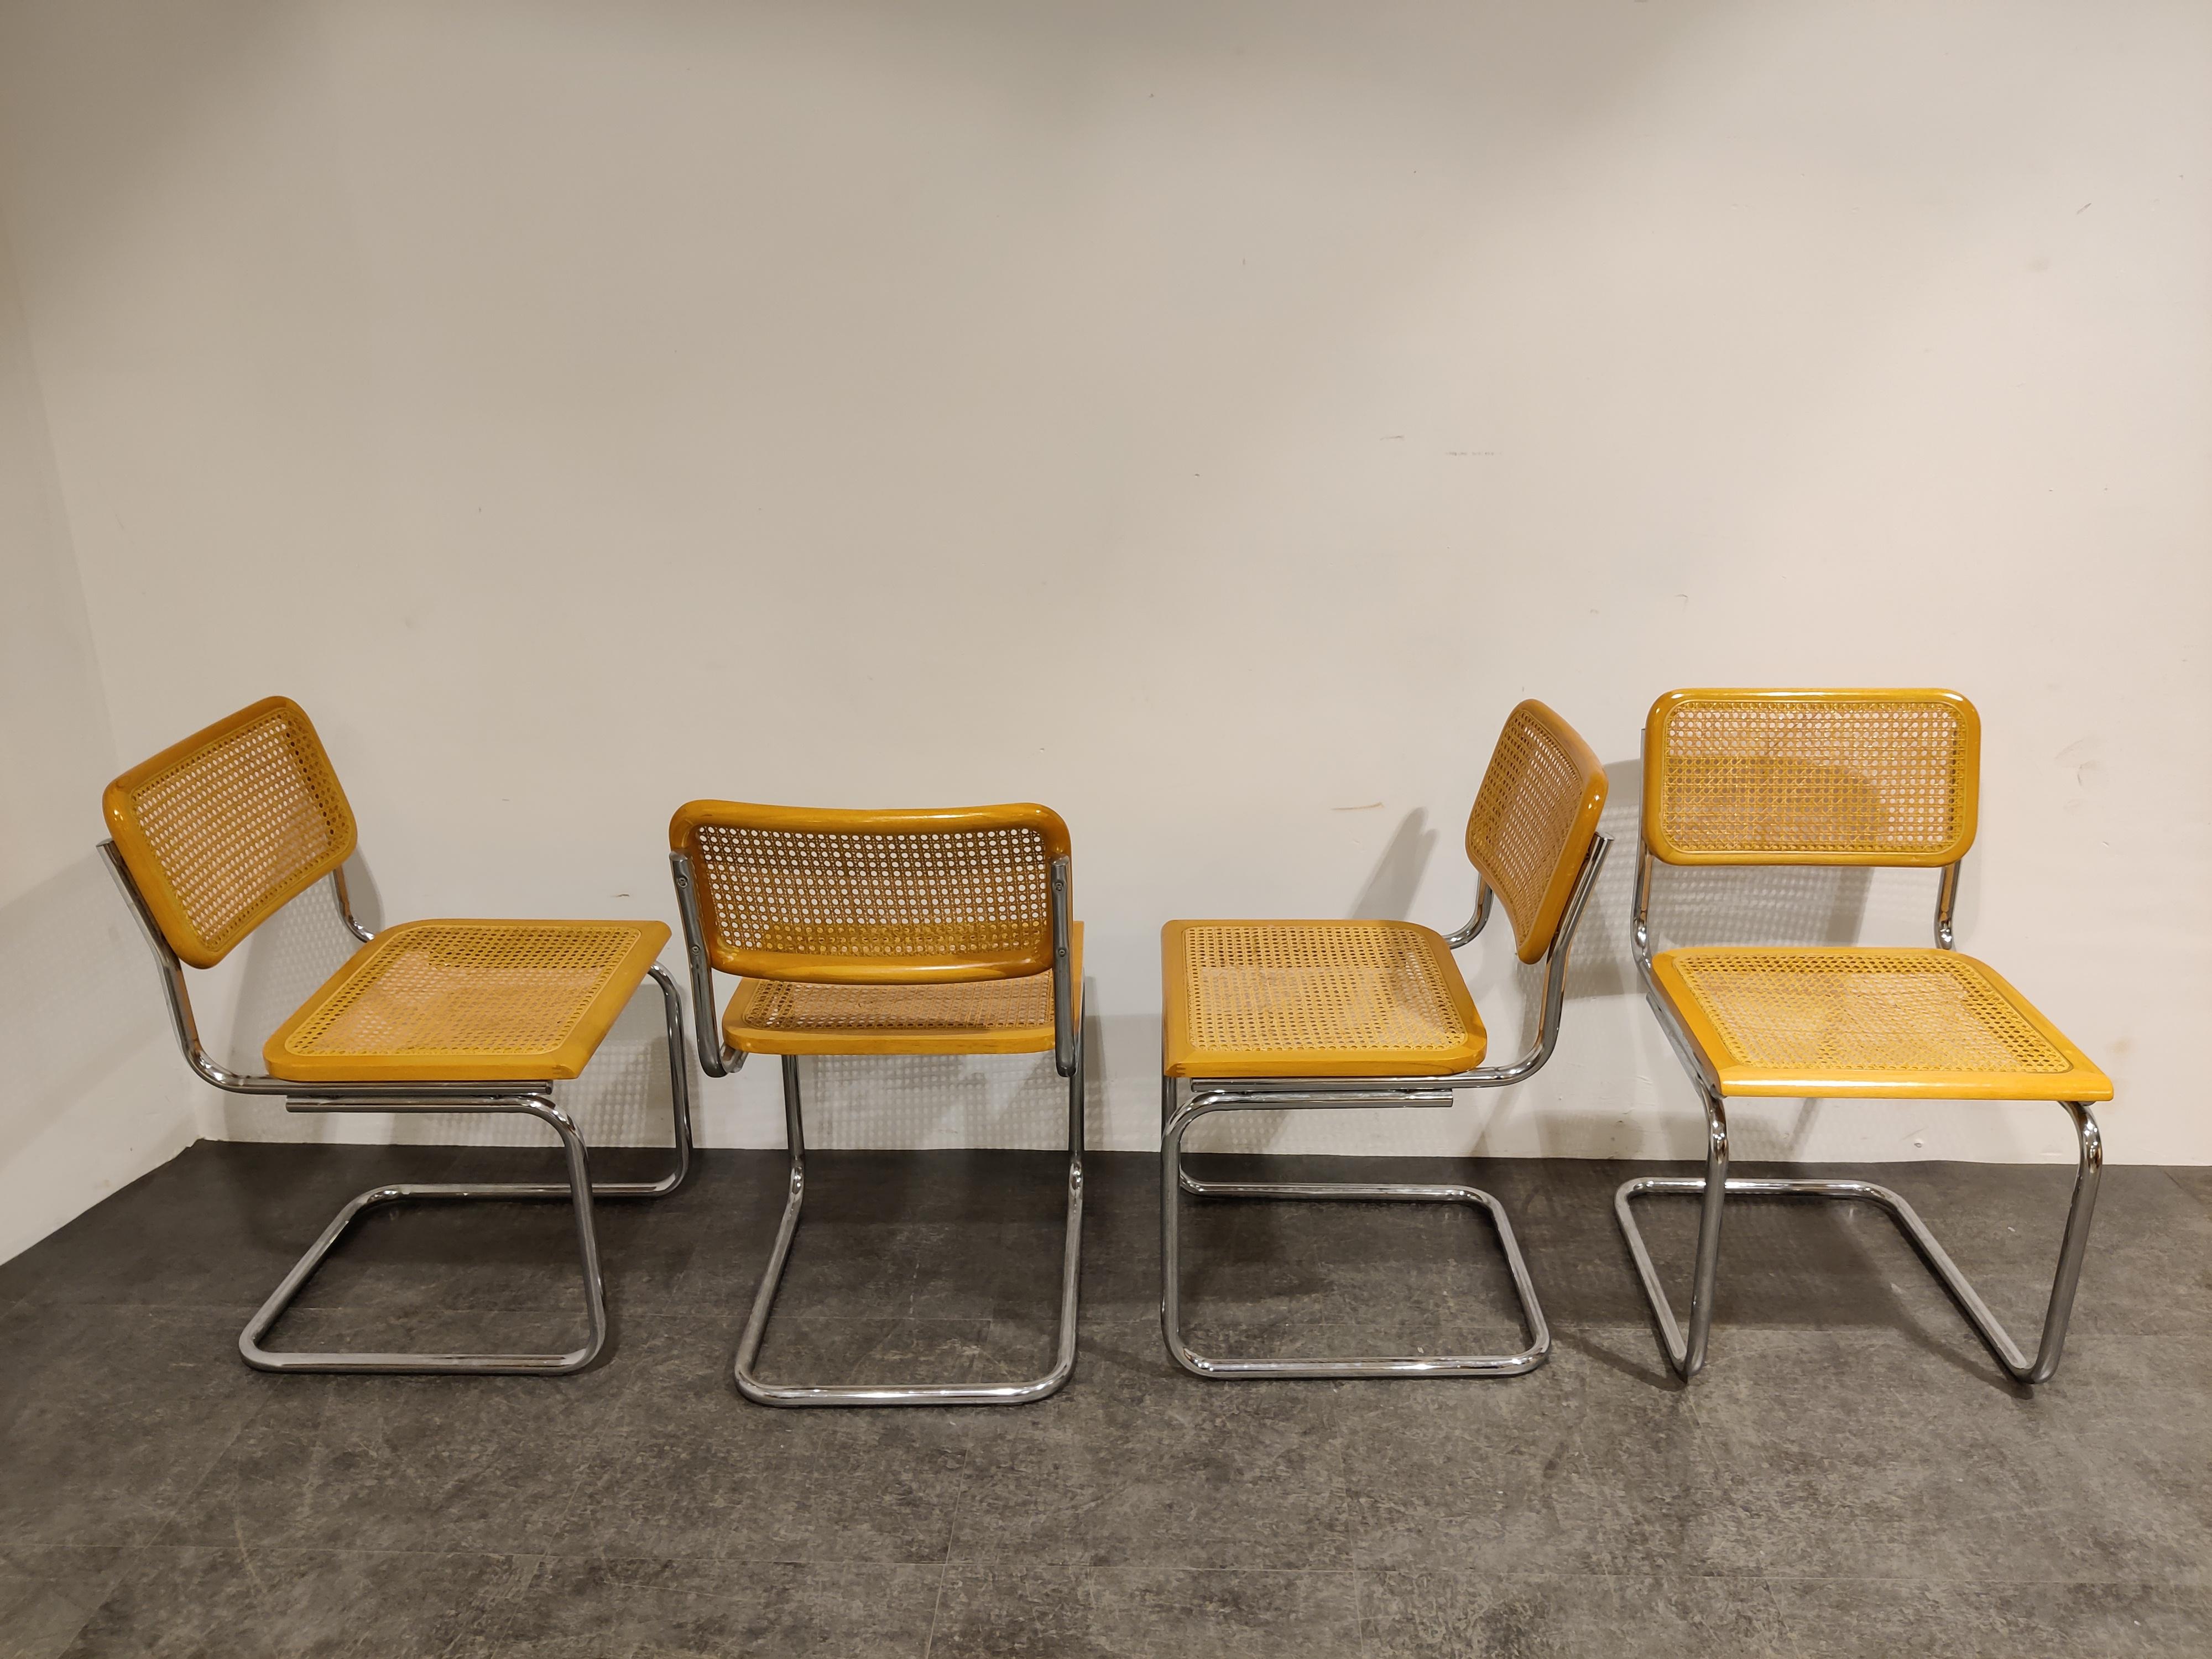 Chrome Set of 4 Vintage Marcel Breuer Style Cesca Chairs, Made in Italy, 1970s